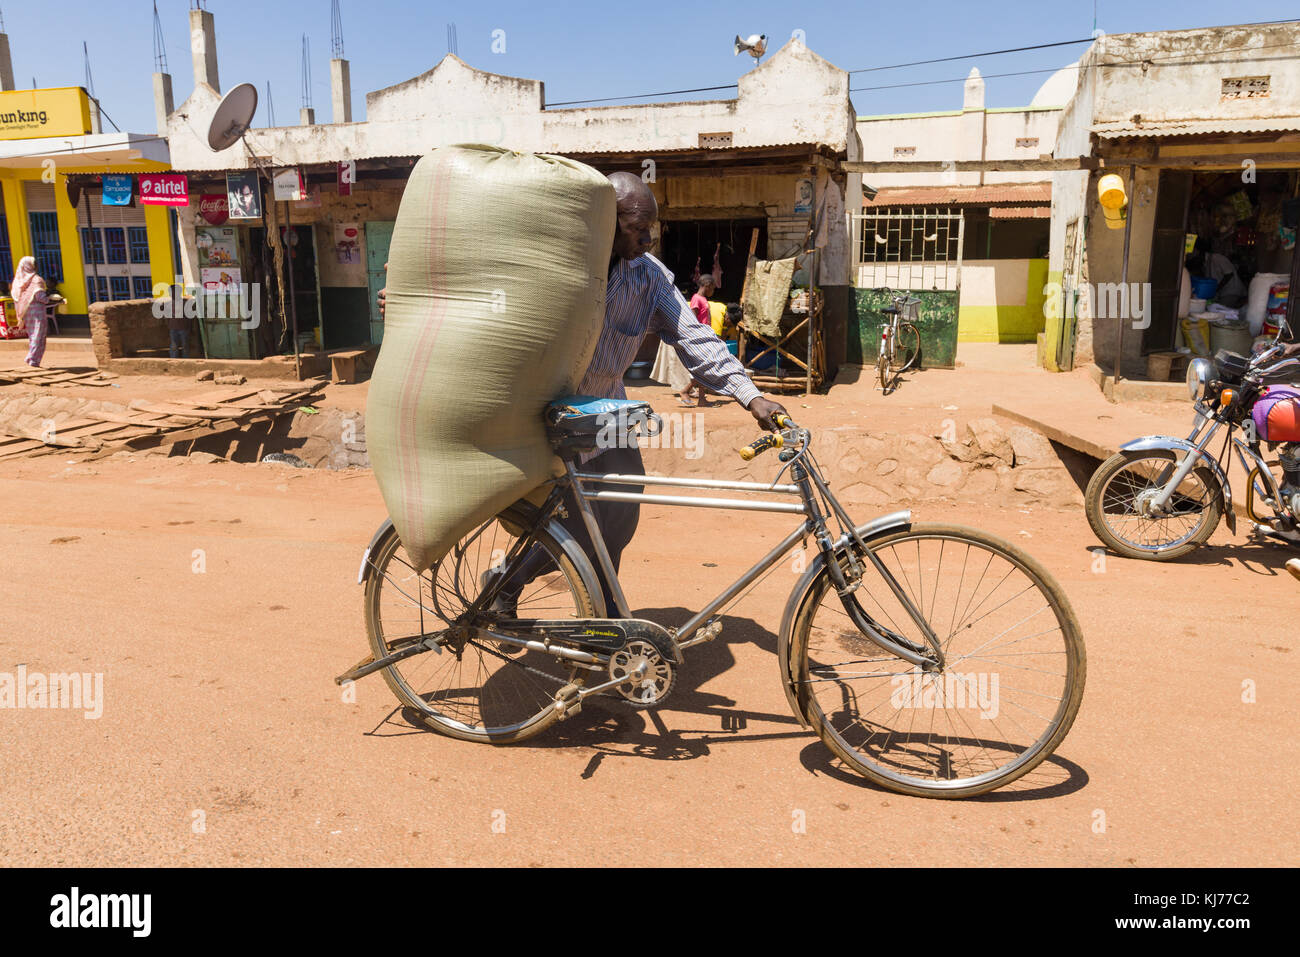 .Ugandan man walking with bicycle transporting a large heavy sack on the seat of the bicycle, Uganda, East Africa Stock Photo